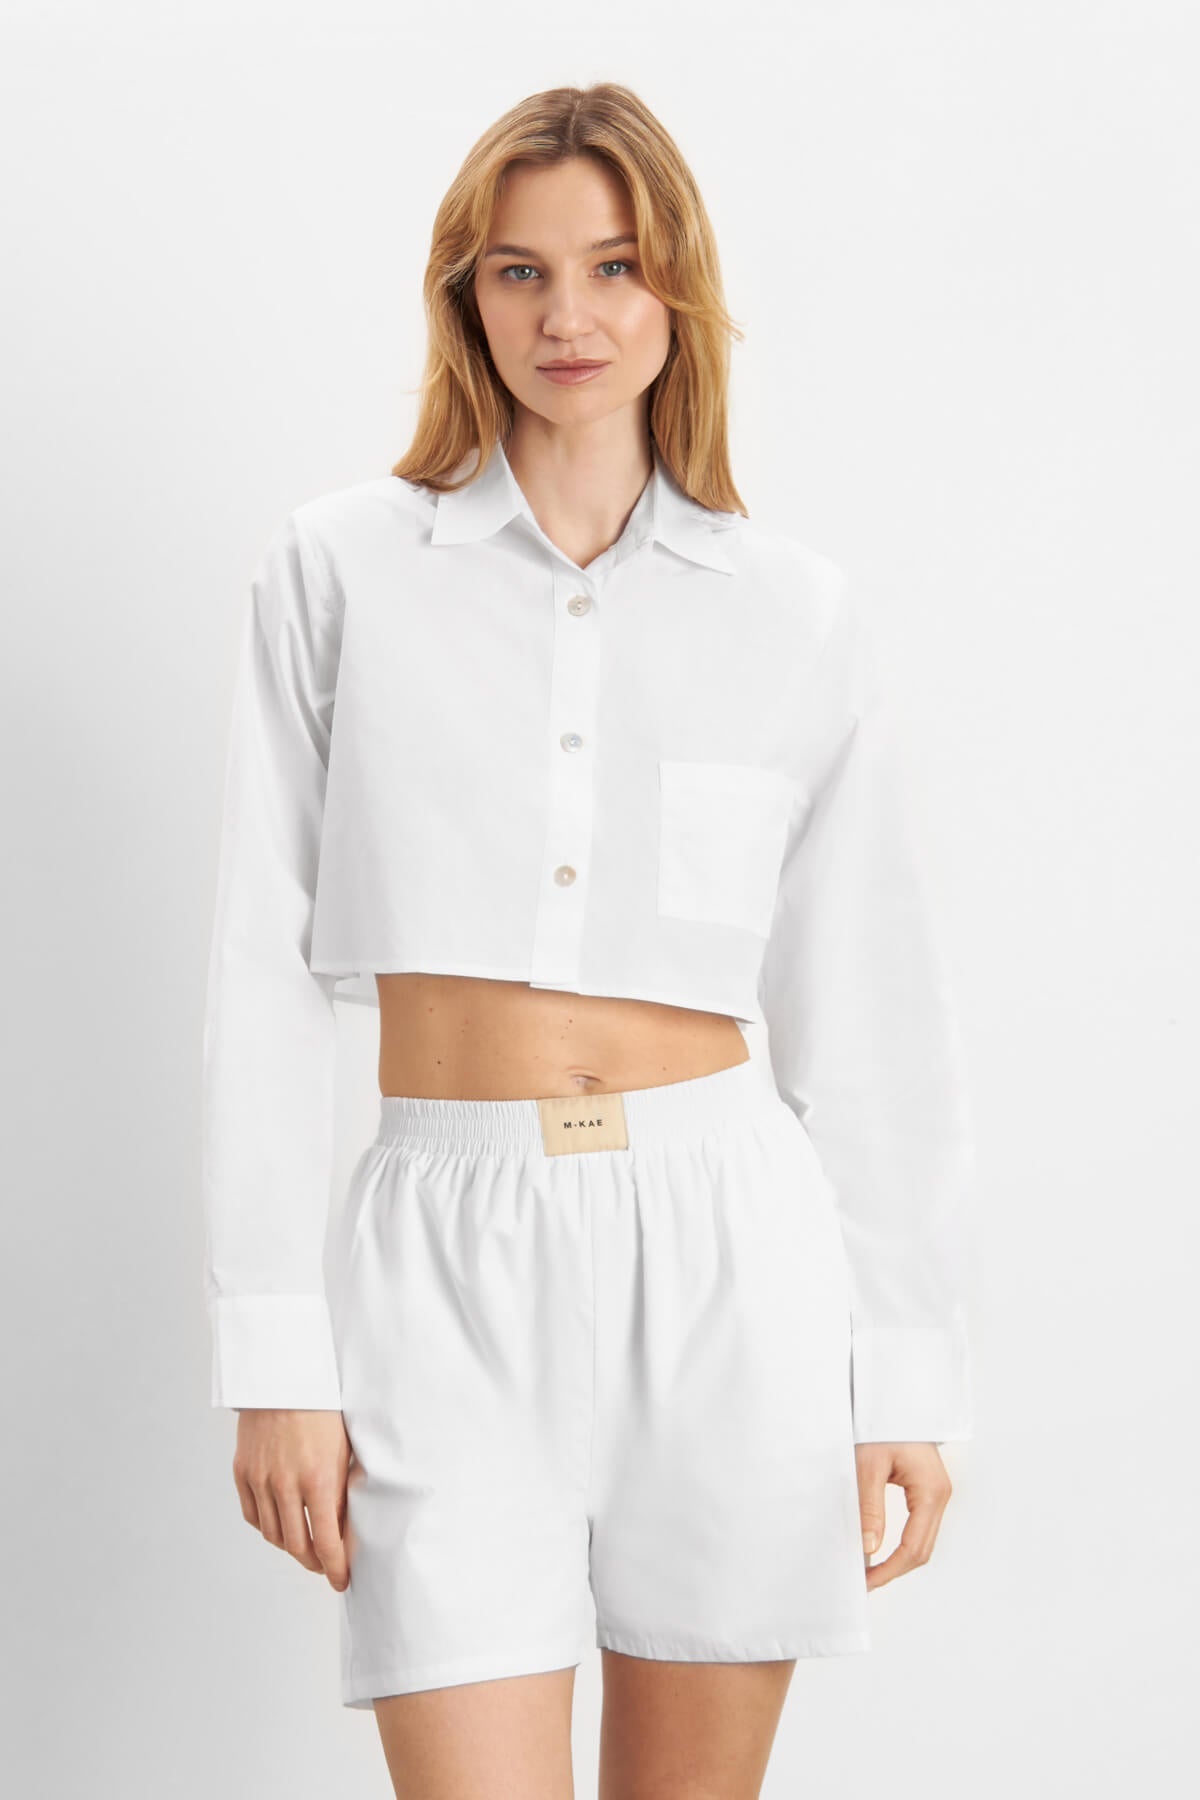 Hurley Cropped Shirt - White